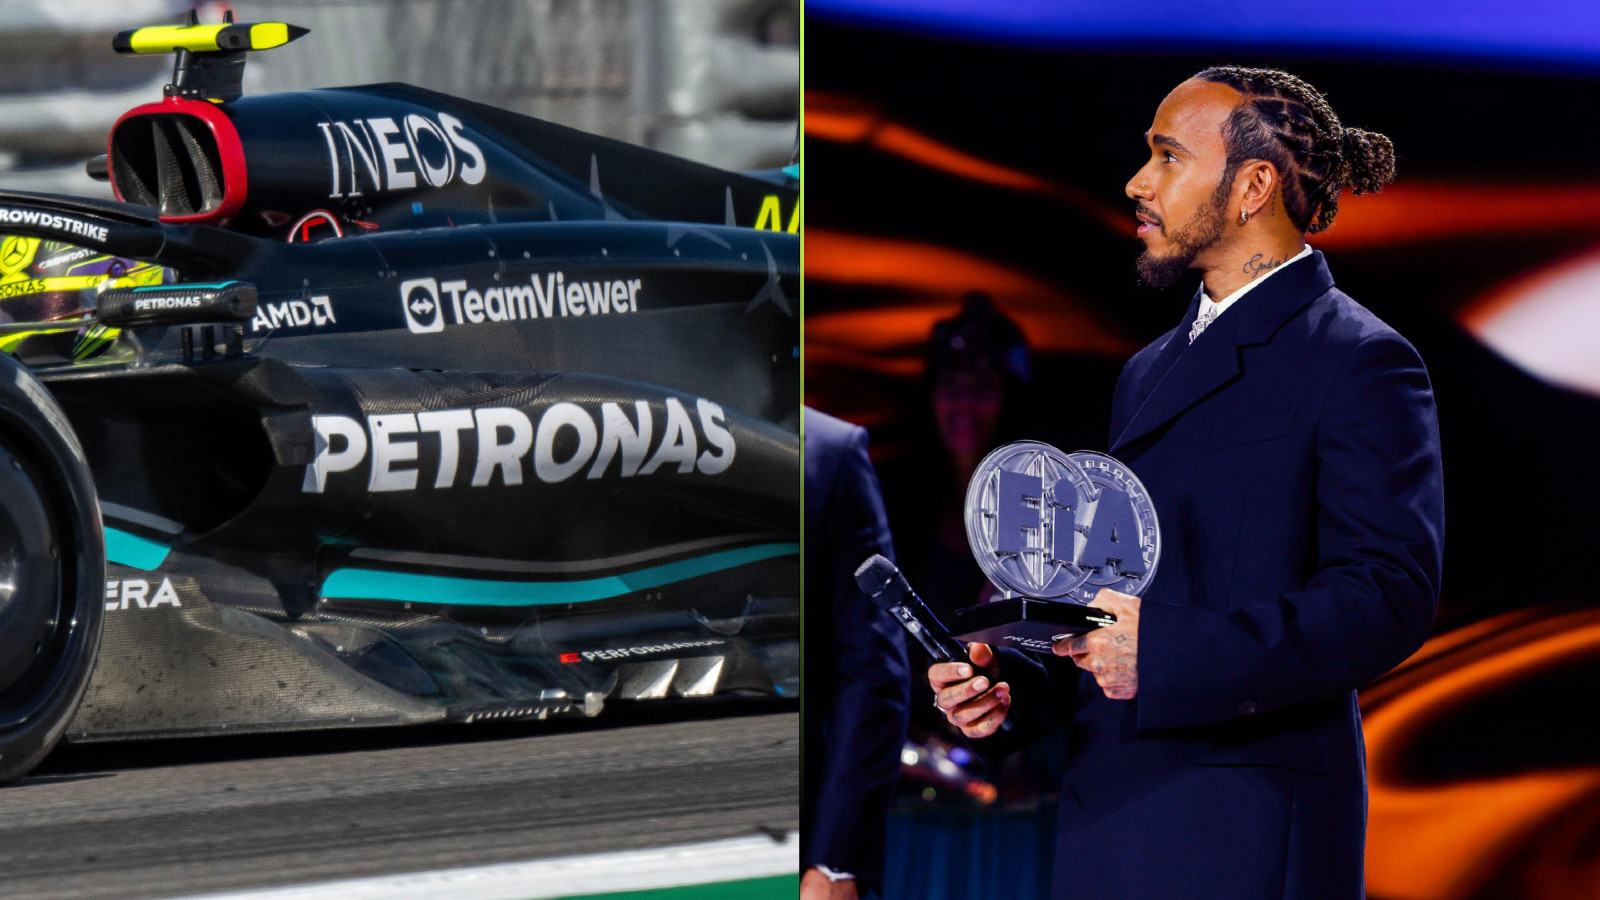 Lewis Hamilton's trophy confusion, Mercedes sidepods and more - F1 news  roundup : PlanetF1